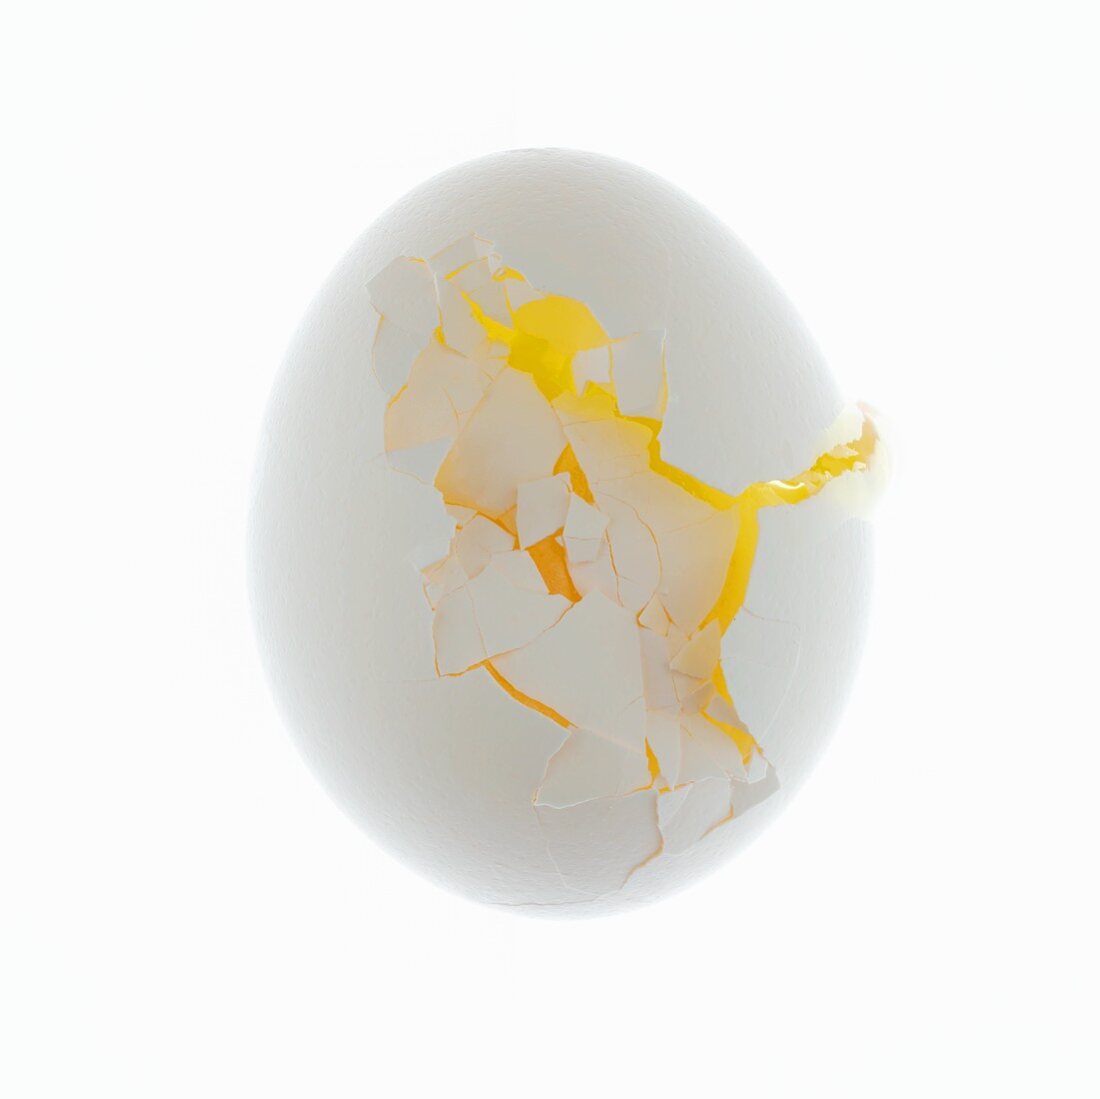 White Egg with Shell Cracked